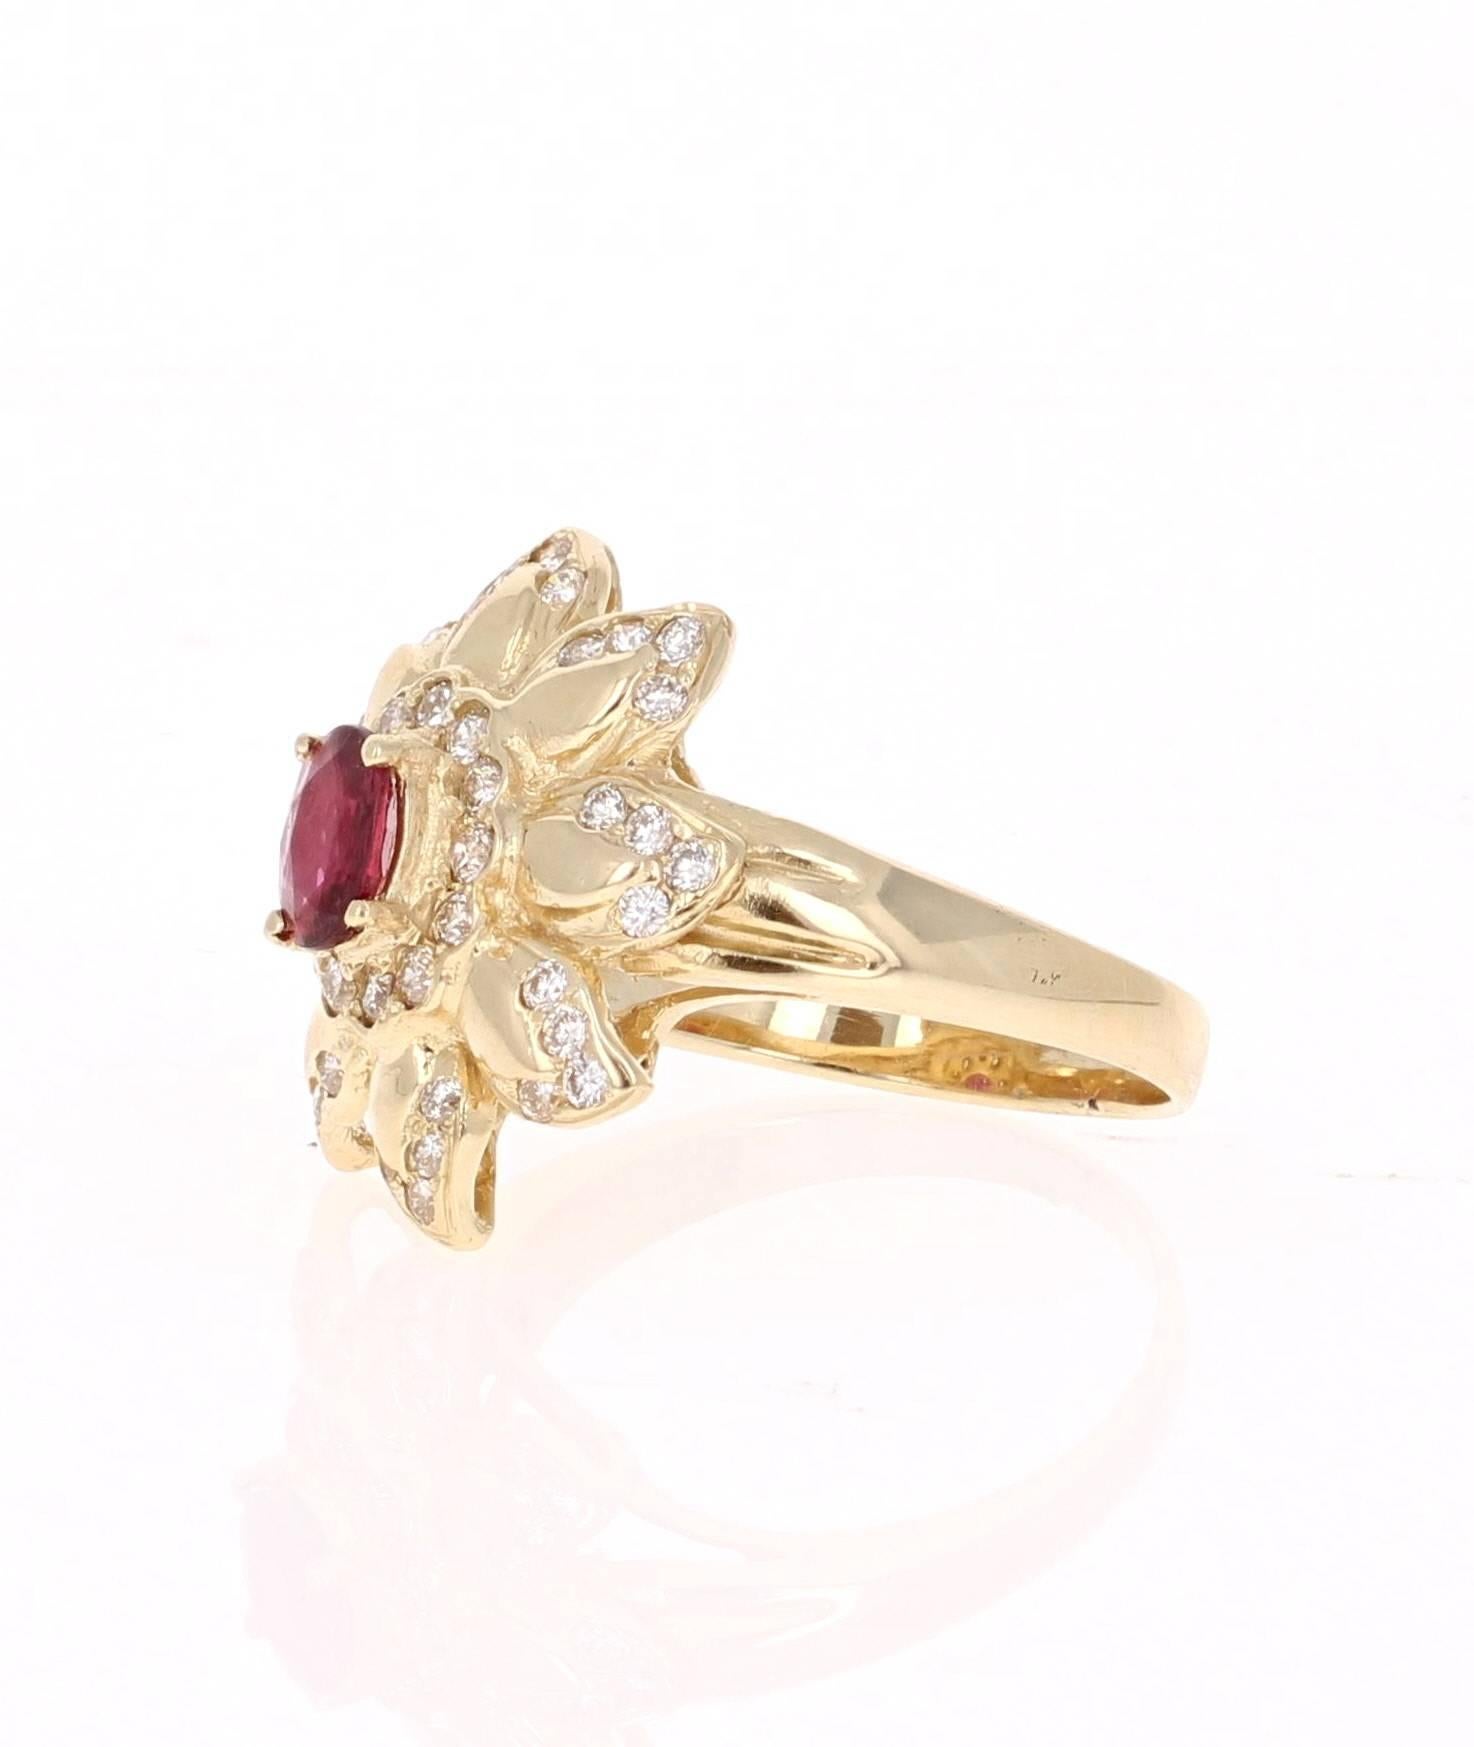 This ring has an Oval Cut Burmese Ruby set in the center of the ring that weighs 0.58 carat.  The measurements of the Ruby are 5mm x 6mm. There are also 44 Round Cut Diamonds that weigh 0.62 carat.  The total carat weight of the ring is 1.20 carats.